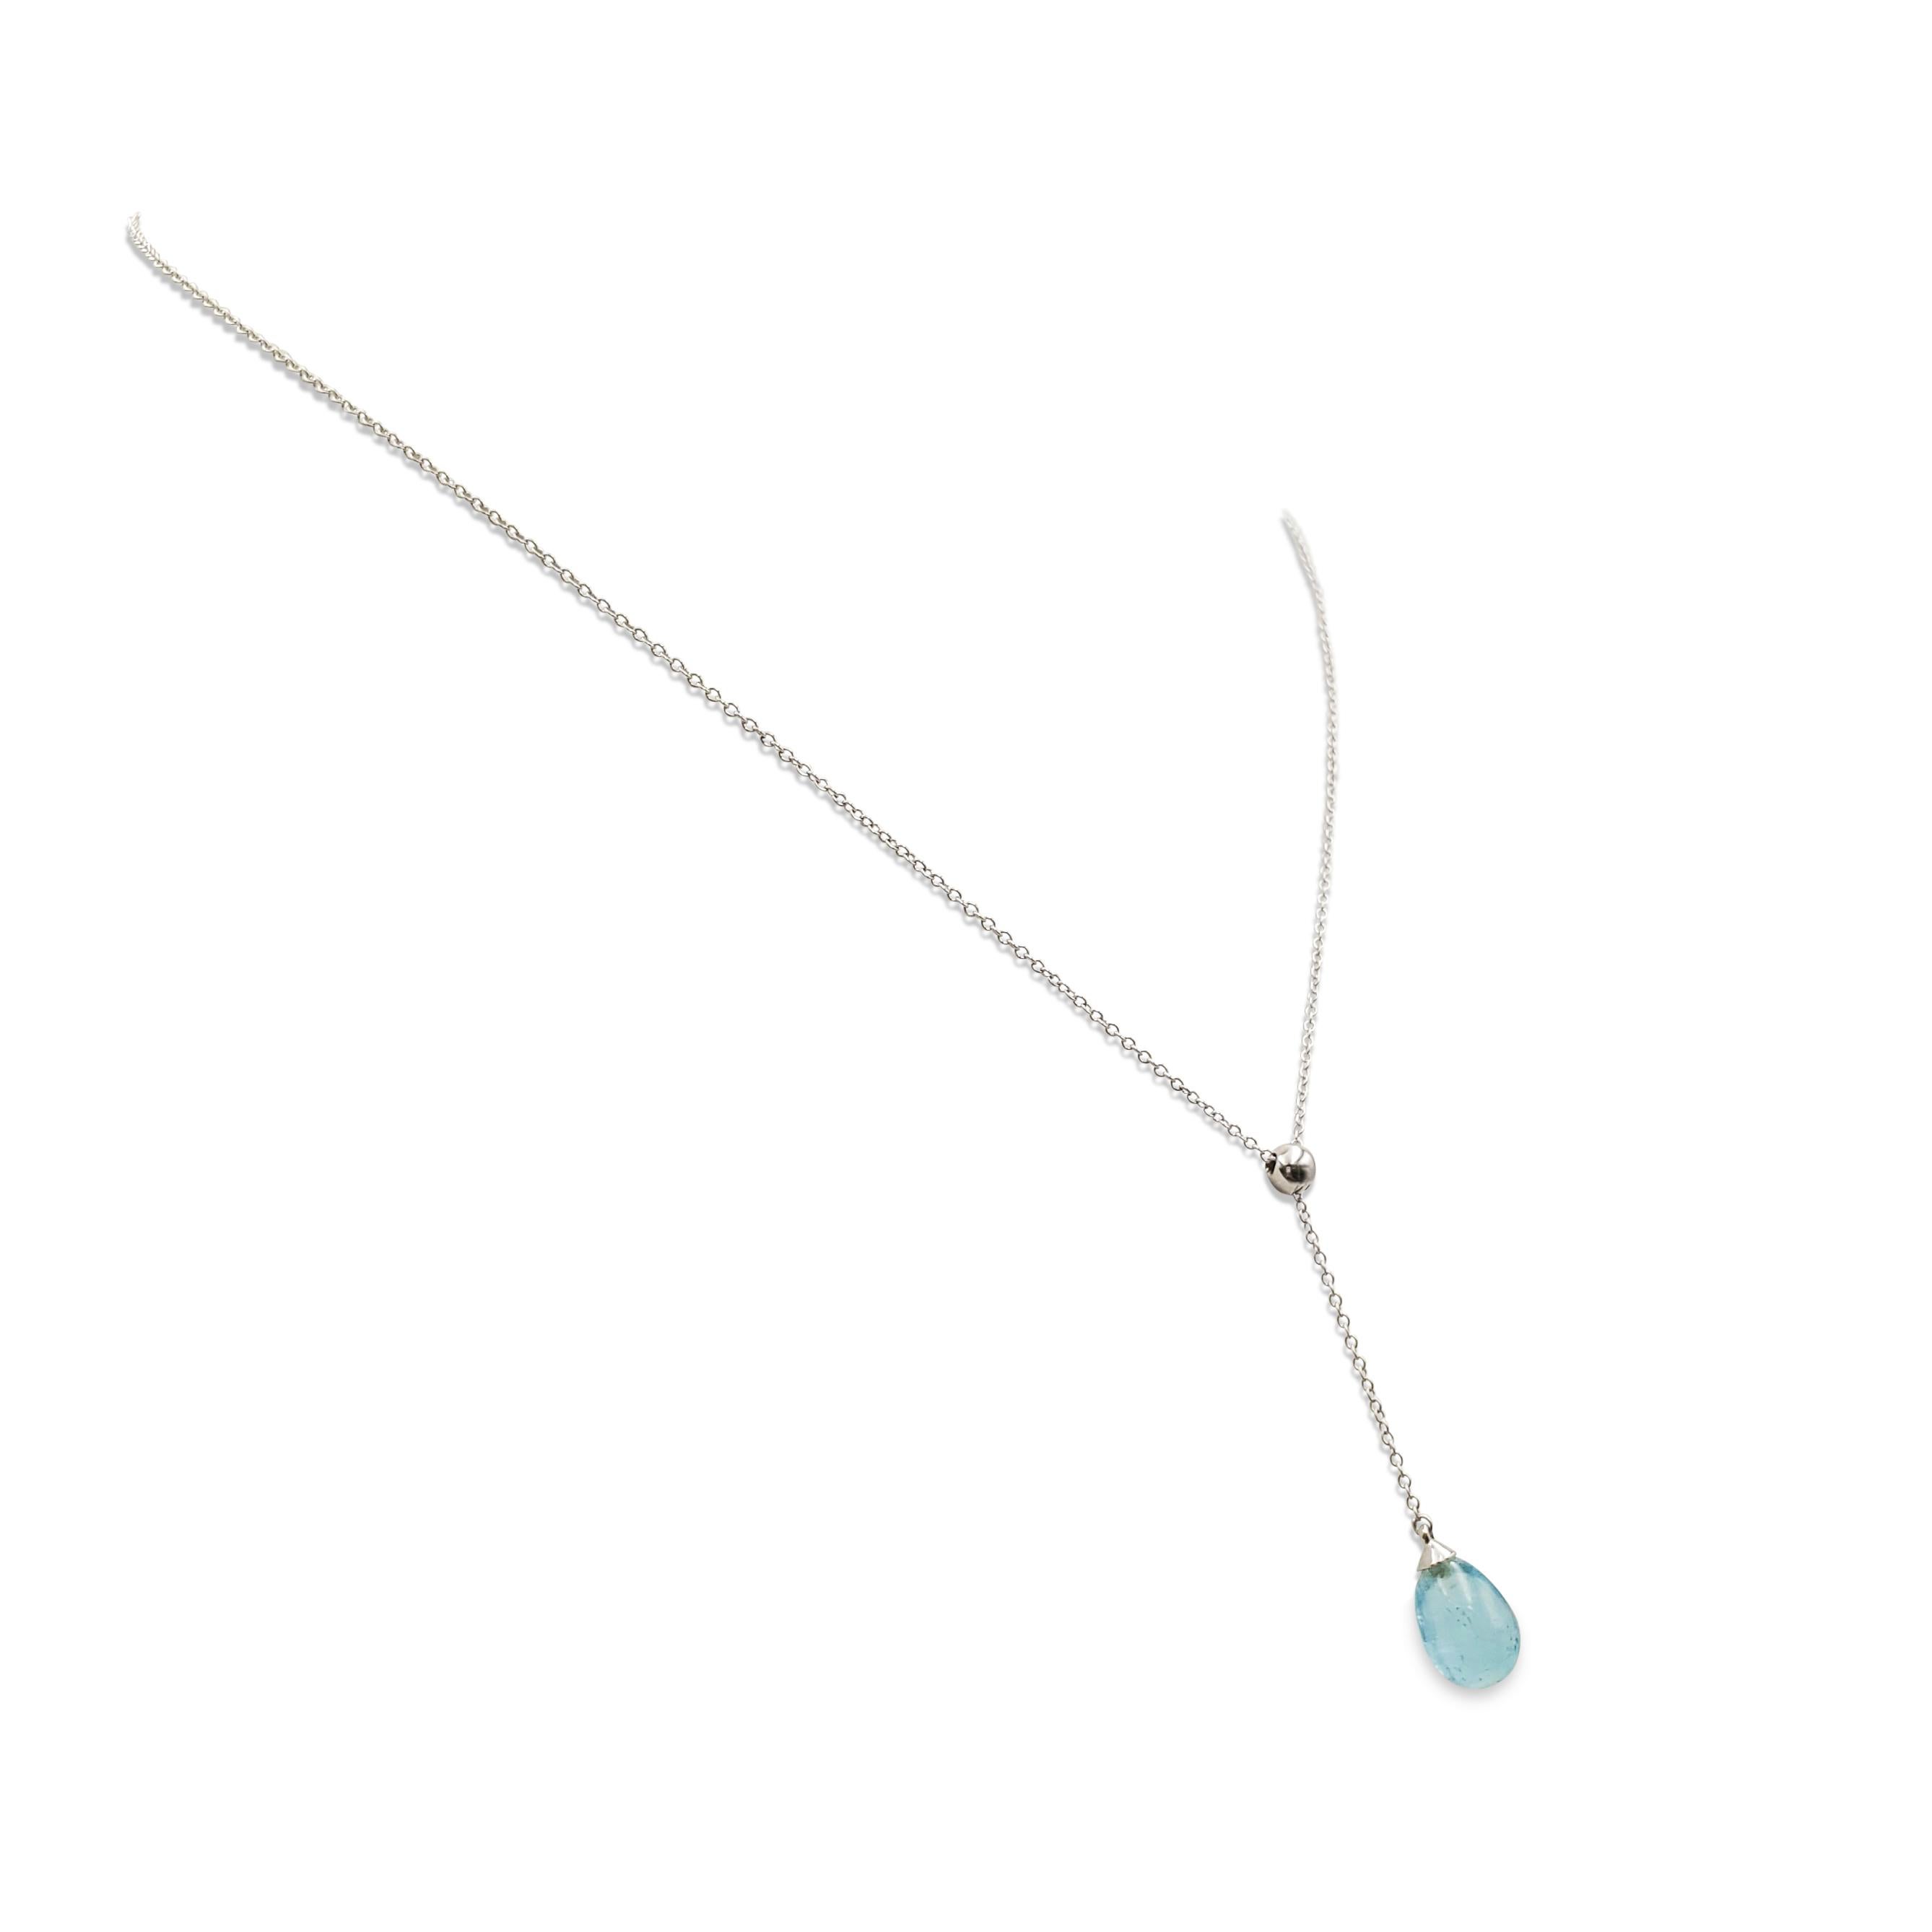 Authentic Tiffany & Co. Rainbow Drop crafted in 18 karat white gold.  Featuring a 1 3/4 inch pendant that is finished with a vibrant aquamarine bead.  The pendant hangs from a delicate 16 inch chain that is signed Tiffany & Co., 750.  Necklace is